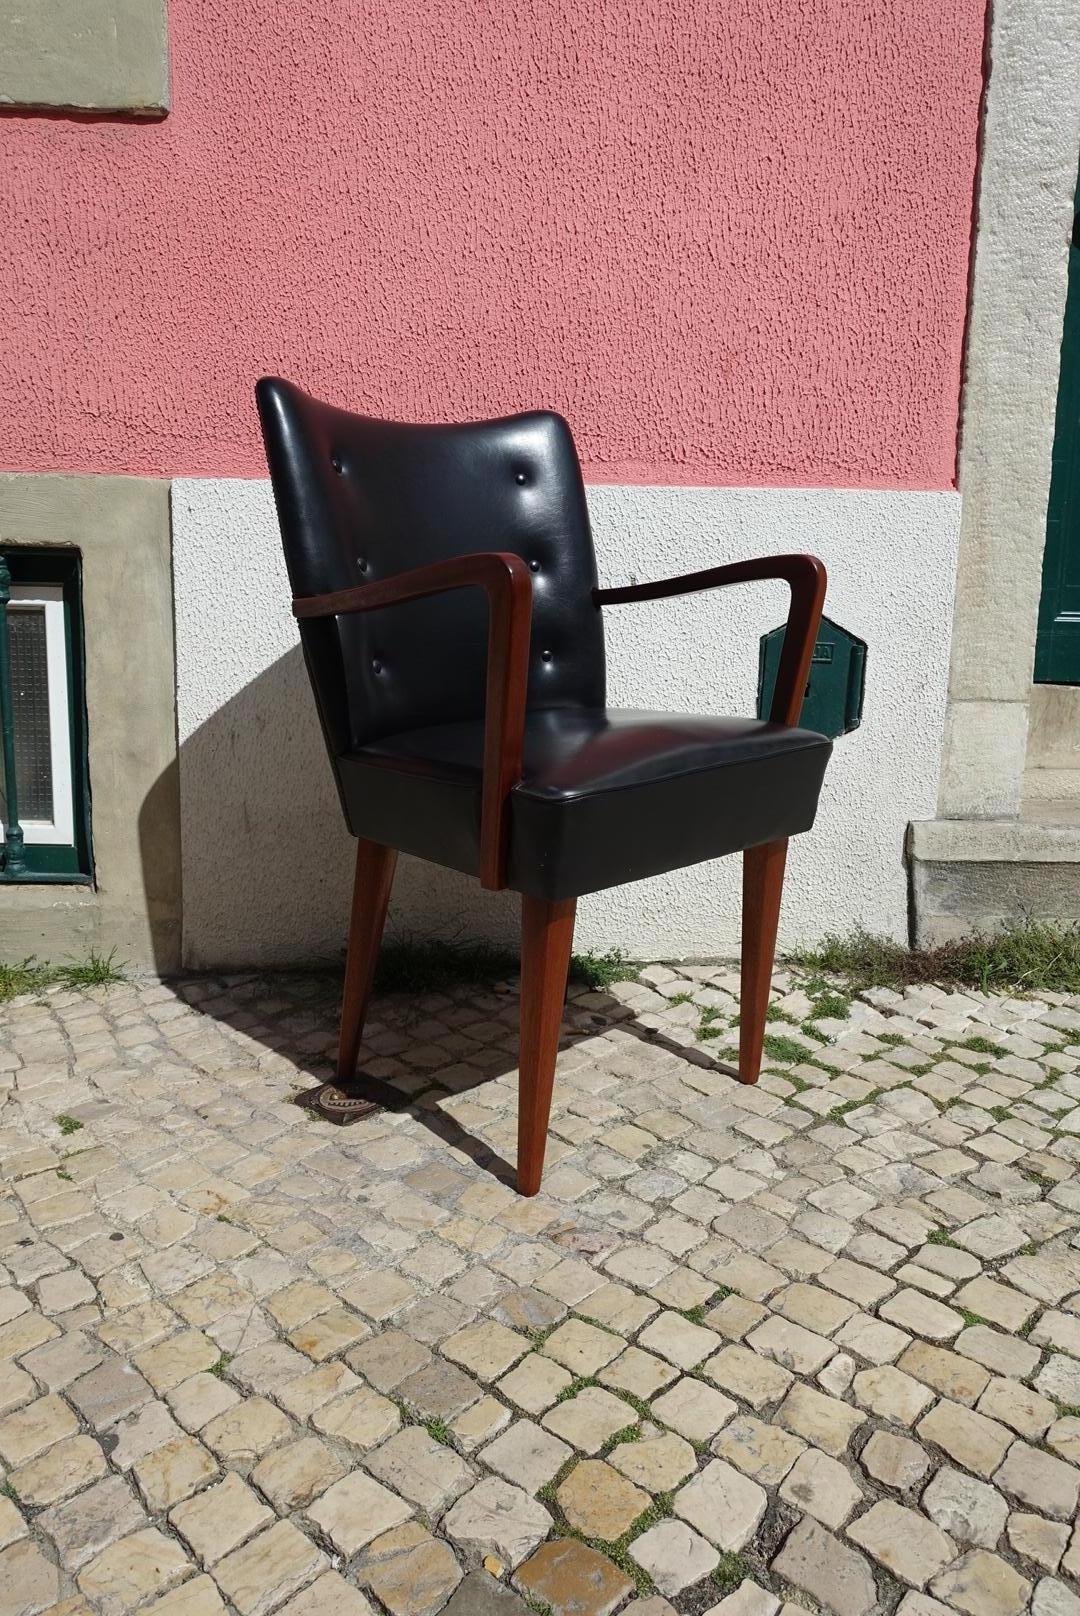 This Paris model armchair was designed by José Espinho for Olaio produced in Portugal in the 1960s.
Made from Mahogany wood and faux leather.
 